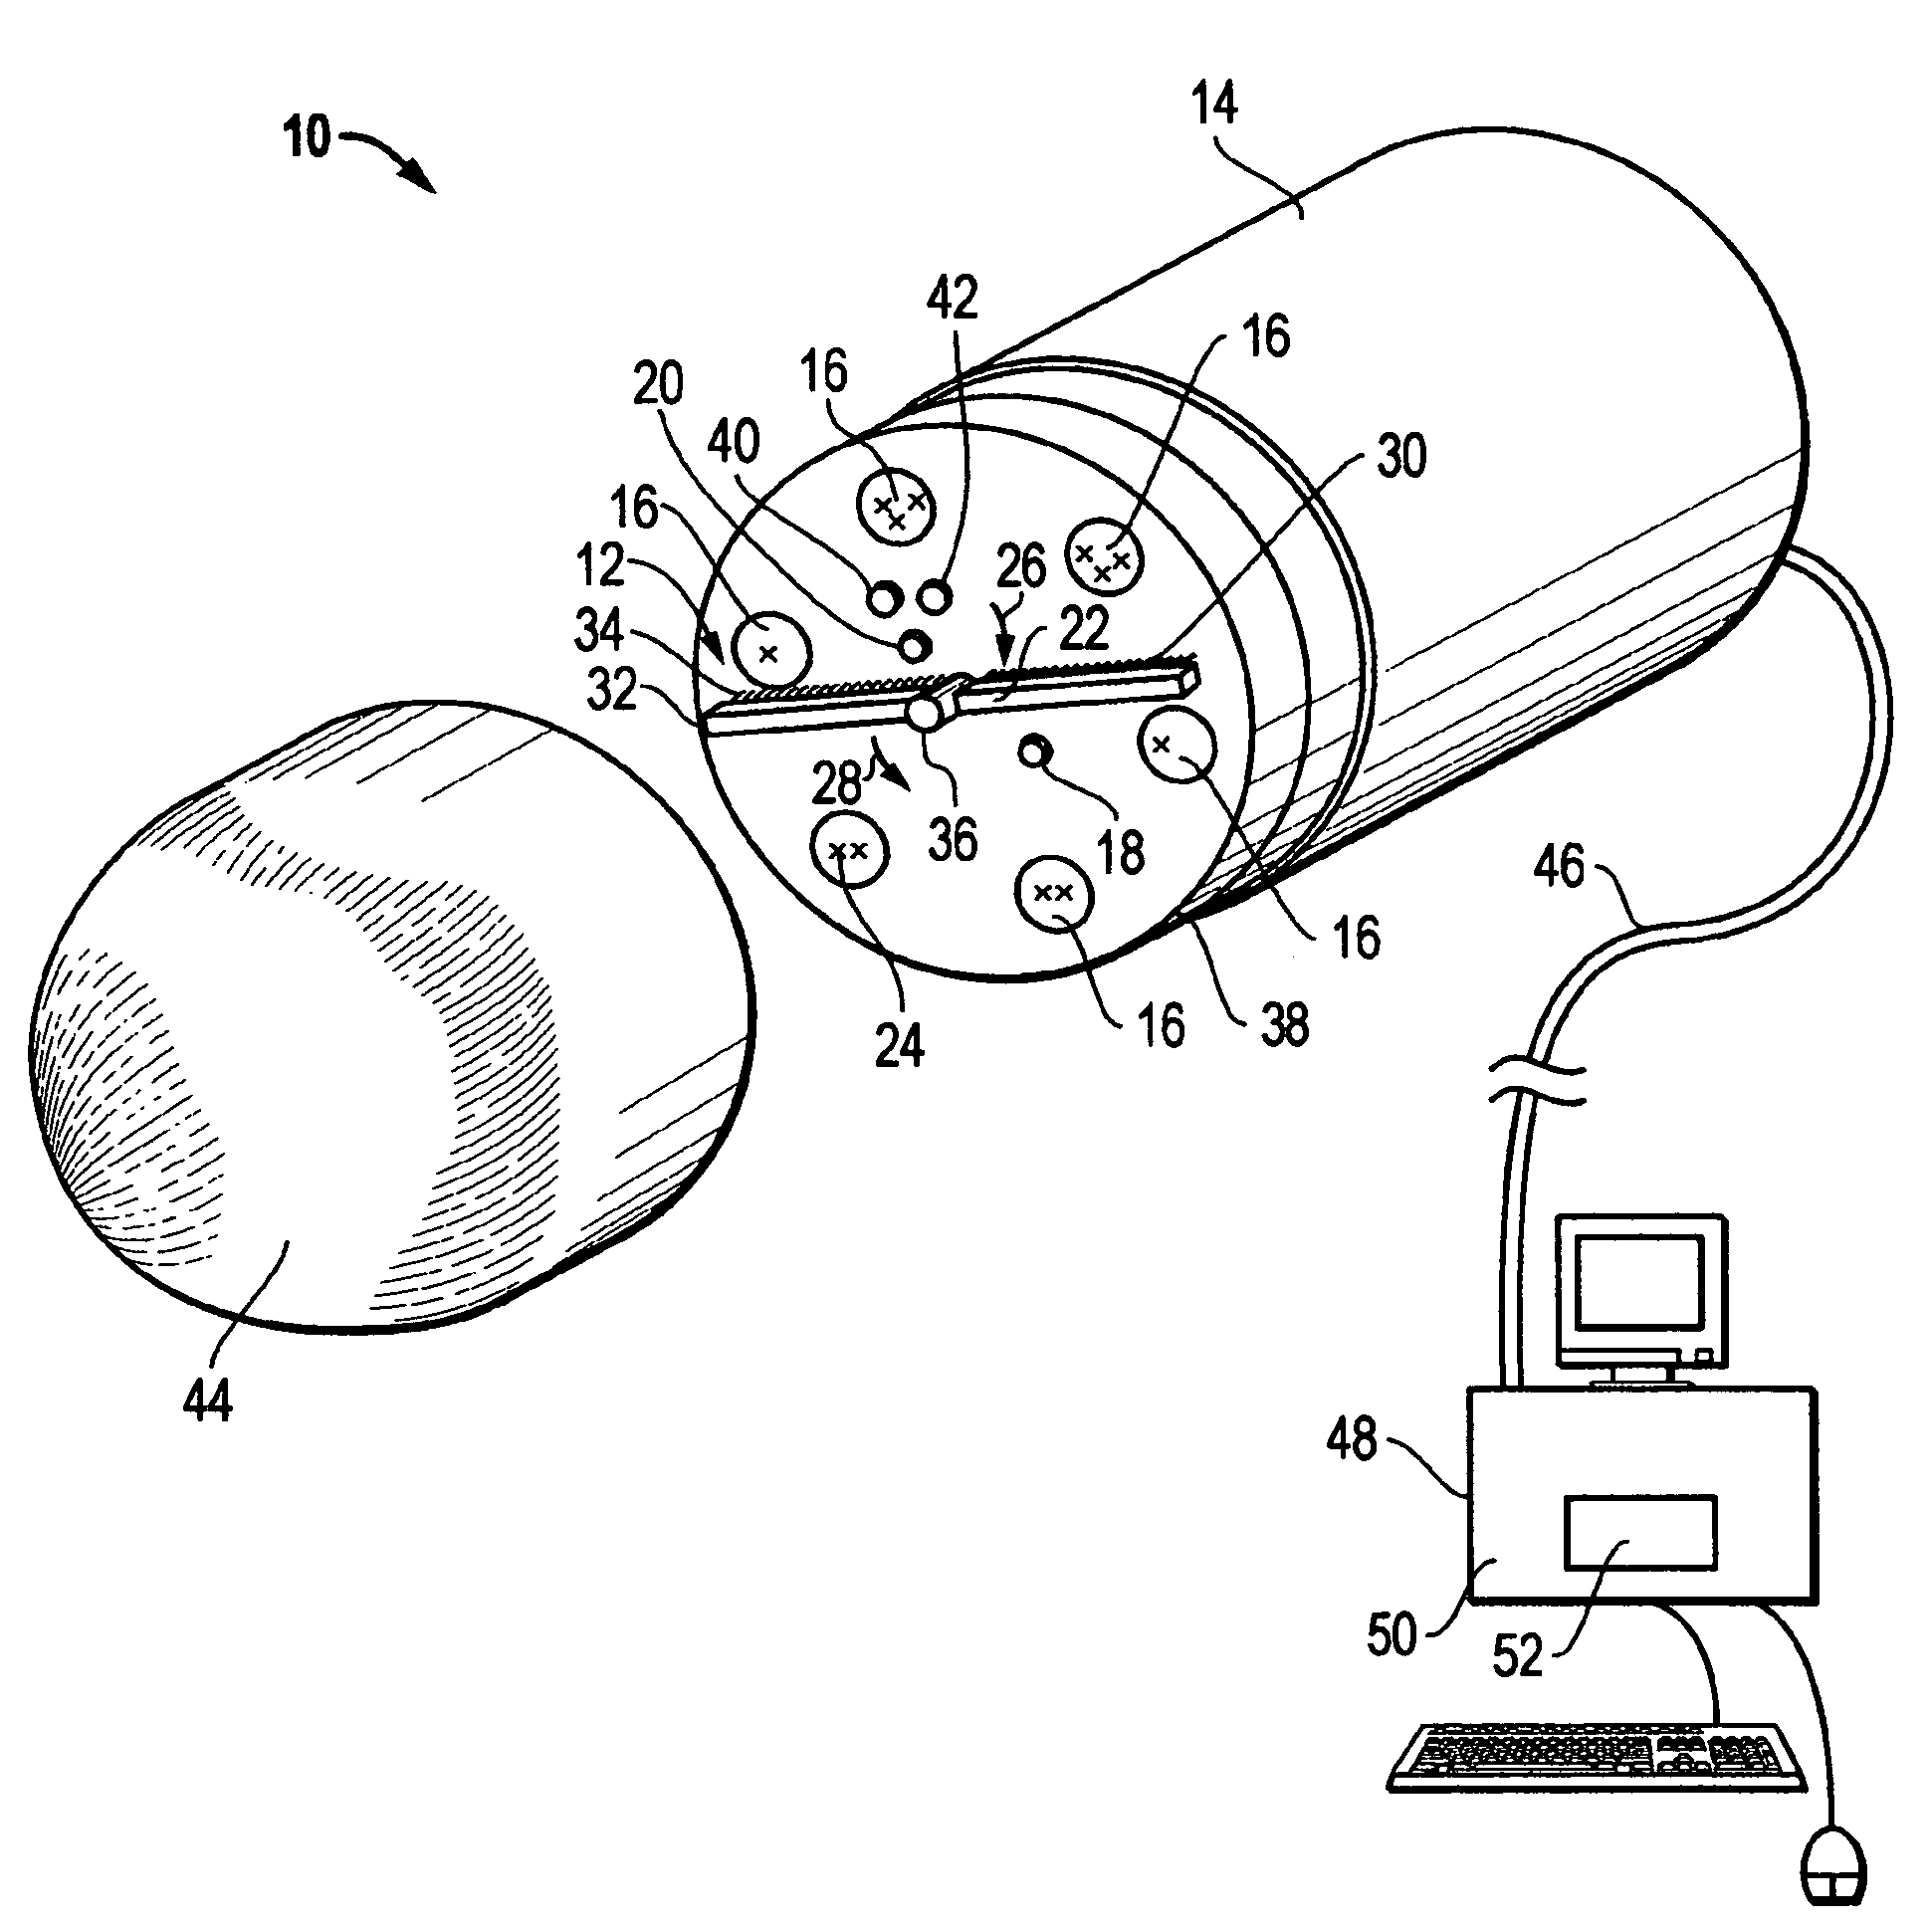 Anti-fouling apparatus and method